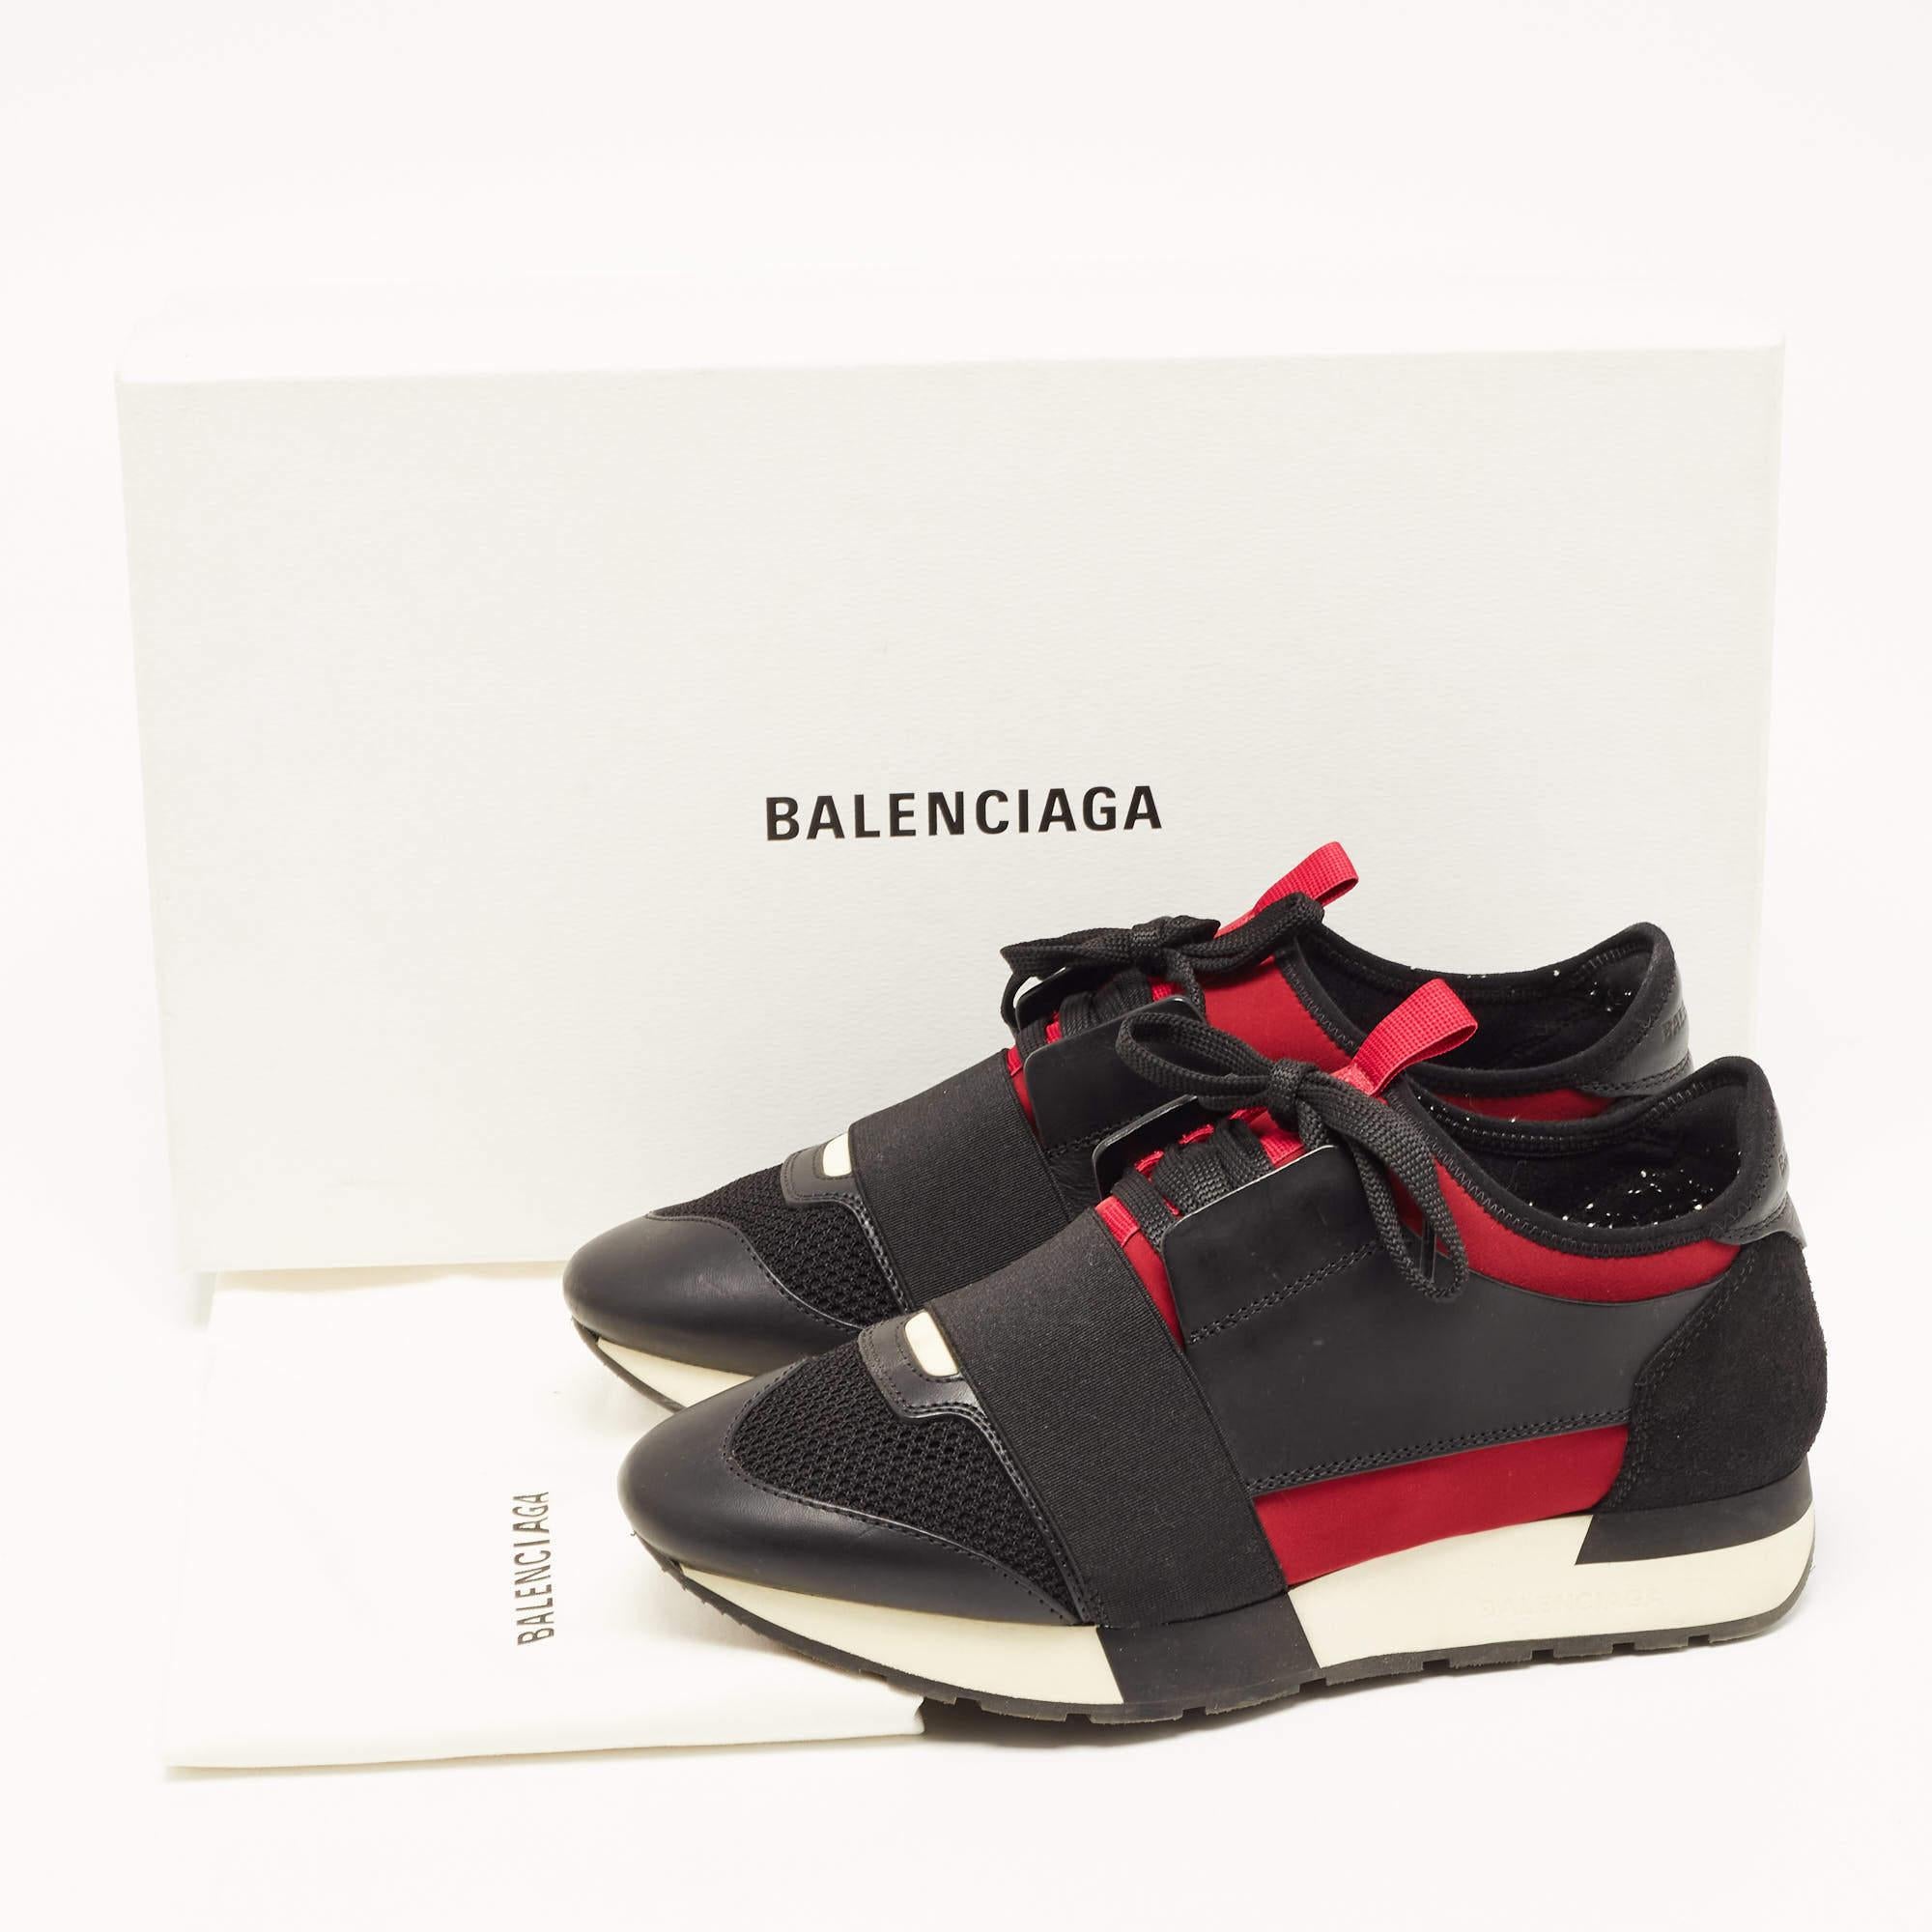 Balenciaga Black/Burgundy Leather and Mesh Race Runner Sneakers Size 37 4